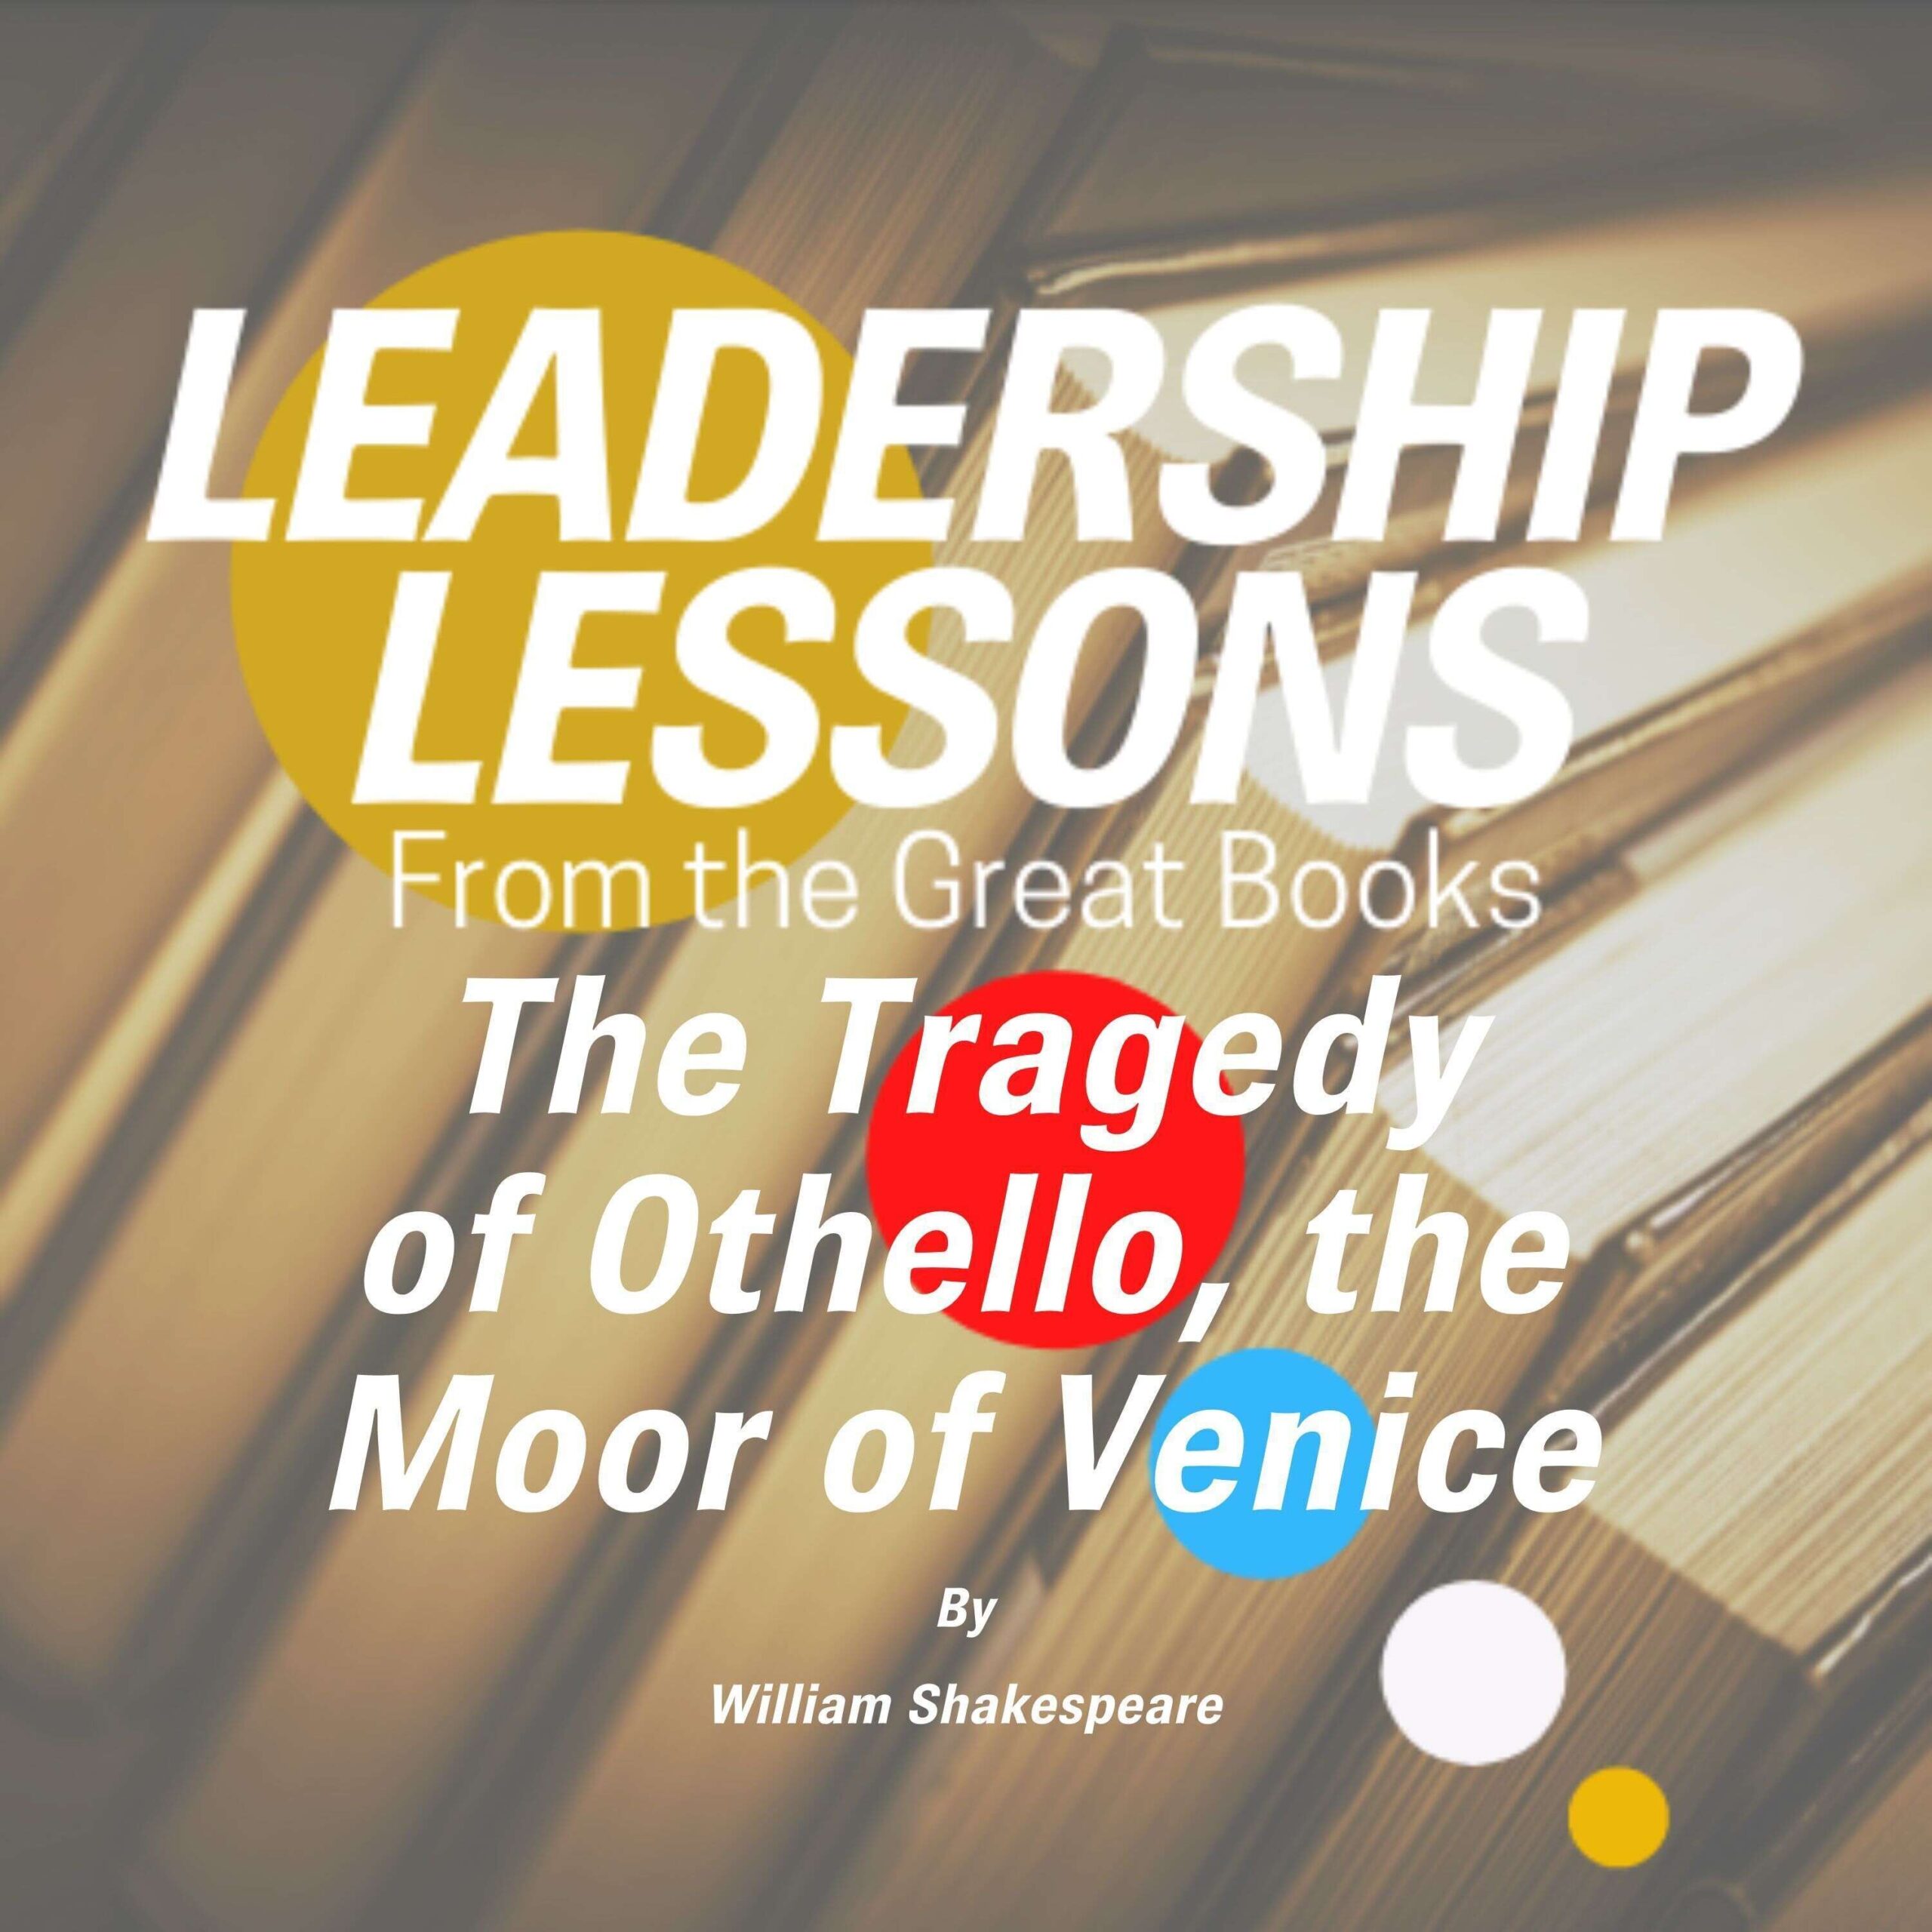 The Tragedy of Othello, the Moor of Venice w/Ryan J. Stout